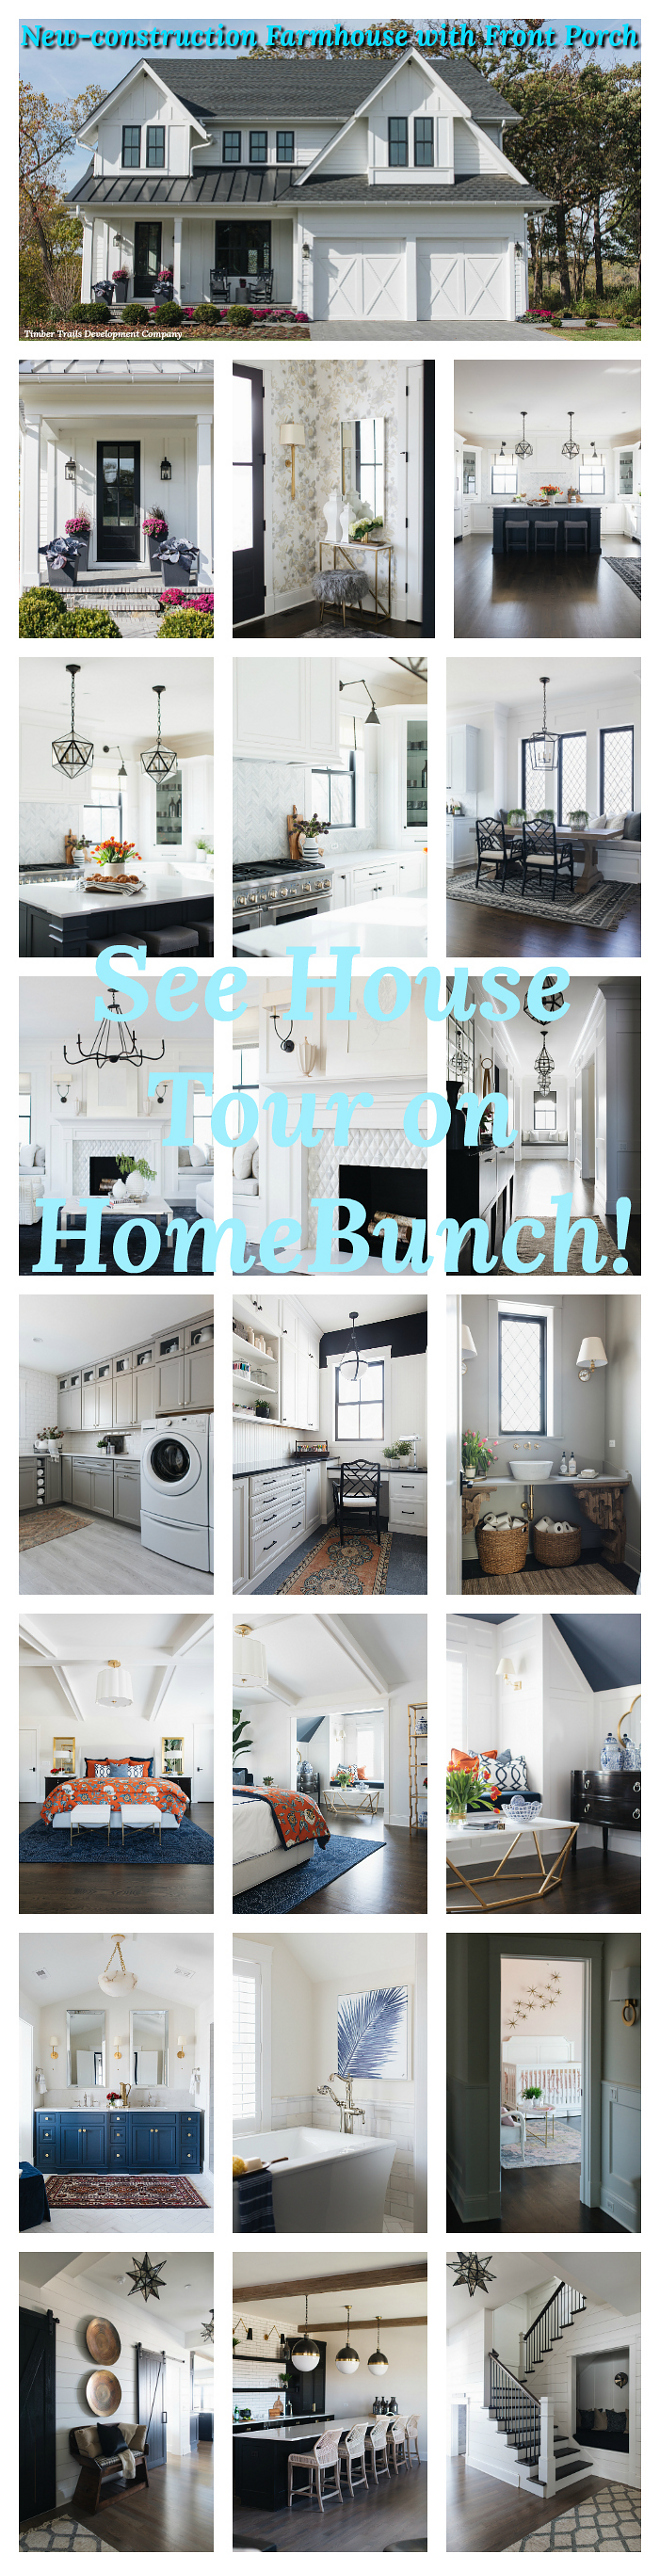 New-construction Farmhouse with Front Porch see house tour on Home Bunch